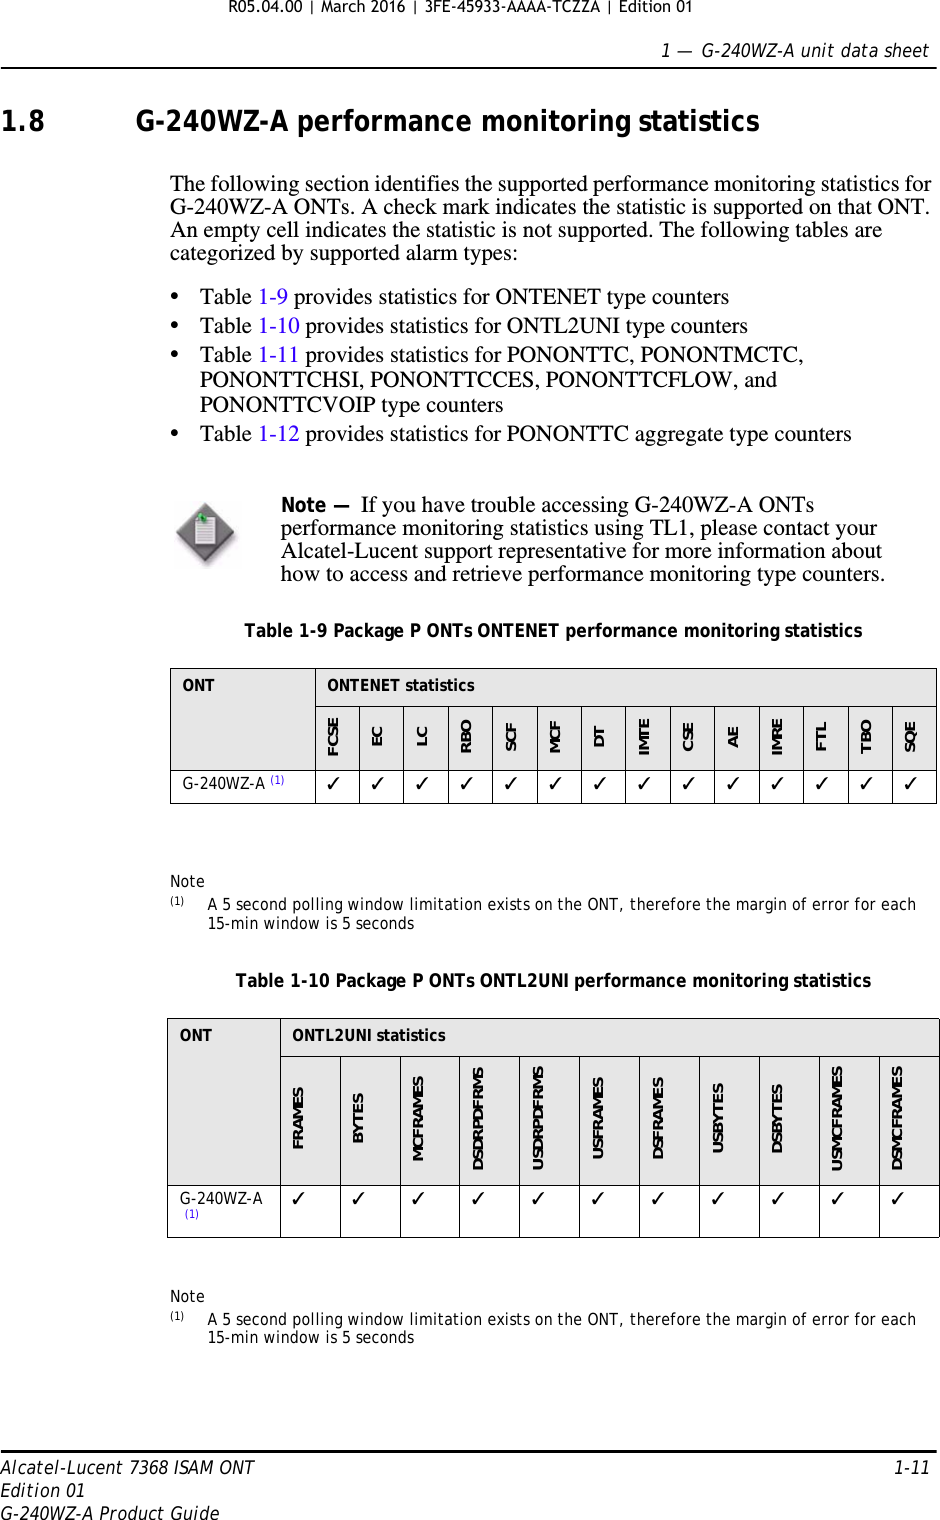 1 —  G-240WZ-A unit data sheetAlcatel-Lucent 7368 ISAM ONT 1-11Edition 01G-240WZ-A Product Guide1.8 G-240WZ-A performance monitoring statisticsThe following section identifies the supported performance monitoring statistics for G-240WZ-A ONTs. A check mark indicates the statistic is supported on that ONT. An empty cell indicates the statistic is not supported. The following tables are categorized by supported alarm types:•Table 1-9 provides statistics for ONTENET type counters•Table 1-10 provides statistics for ONTL2UNI type counters•Table 1-11 provides statistics for PONONTTC, PONONTMCTC, PONONTTCHSI, PONONTTCCES, PONONTTCFLOW, and PONONTTCVOIP type counters•Table 1-12 provides statistics for PONONTTC aggregate type countersTable 1-9 Package P ONTs ONTENET performance monitoring statisticsNote(1) A 5 second polling window limitation exists on the ONT, therefore the margin of error for each 15-min window is 5 secondsTable 1-10 Package P ONTs ONTL2UNI performance monitoring statisticsNote(1) A 5 second polling window limitation exists on the ONT, therefore the margin of error for each 15-min window is 5 secondsNote —  If you have trouble accessing G-240WZ-A ONTs performance monitoring statistics using TL1, please contact your Alcatel-Lucent support representative for more information about how to access and retrieve performance monitoring type counters.ONT ONTENET statisticsFCSEECLCRBOSCFMCFDTIMTECSEAEIMREFTLTBOSQEG-240WZ-A (1) ✓✓✓✓✓✓✓✓✓✓✓✓✓✓ONT ONTL2UNI statisticsFRAMESBYTESMCFRAMESDSDRPDFRMSUSDRPDFRMSUSFRAMESDSFRAMESUSBYTESDSBYTESUSMCFRAMESDSMCFRAMESG-240WZ-A(1)✓✓✓✓✓✓✓✓✓✓✓R05.04.00 | March 2016 | 3FE-45933-AAAA-TCZZA | Edition 01 